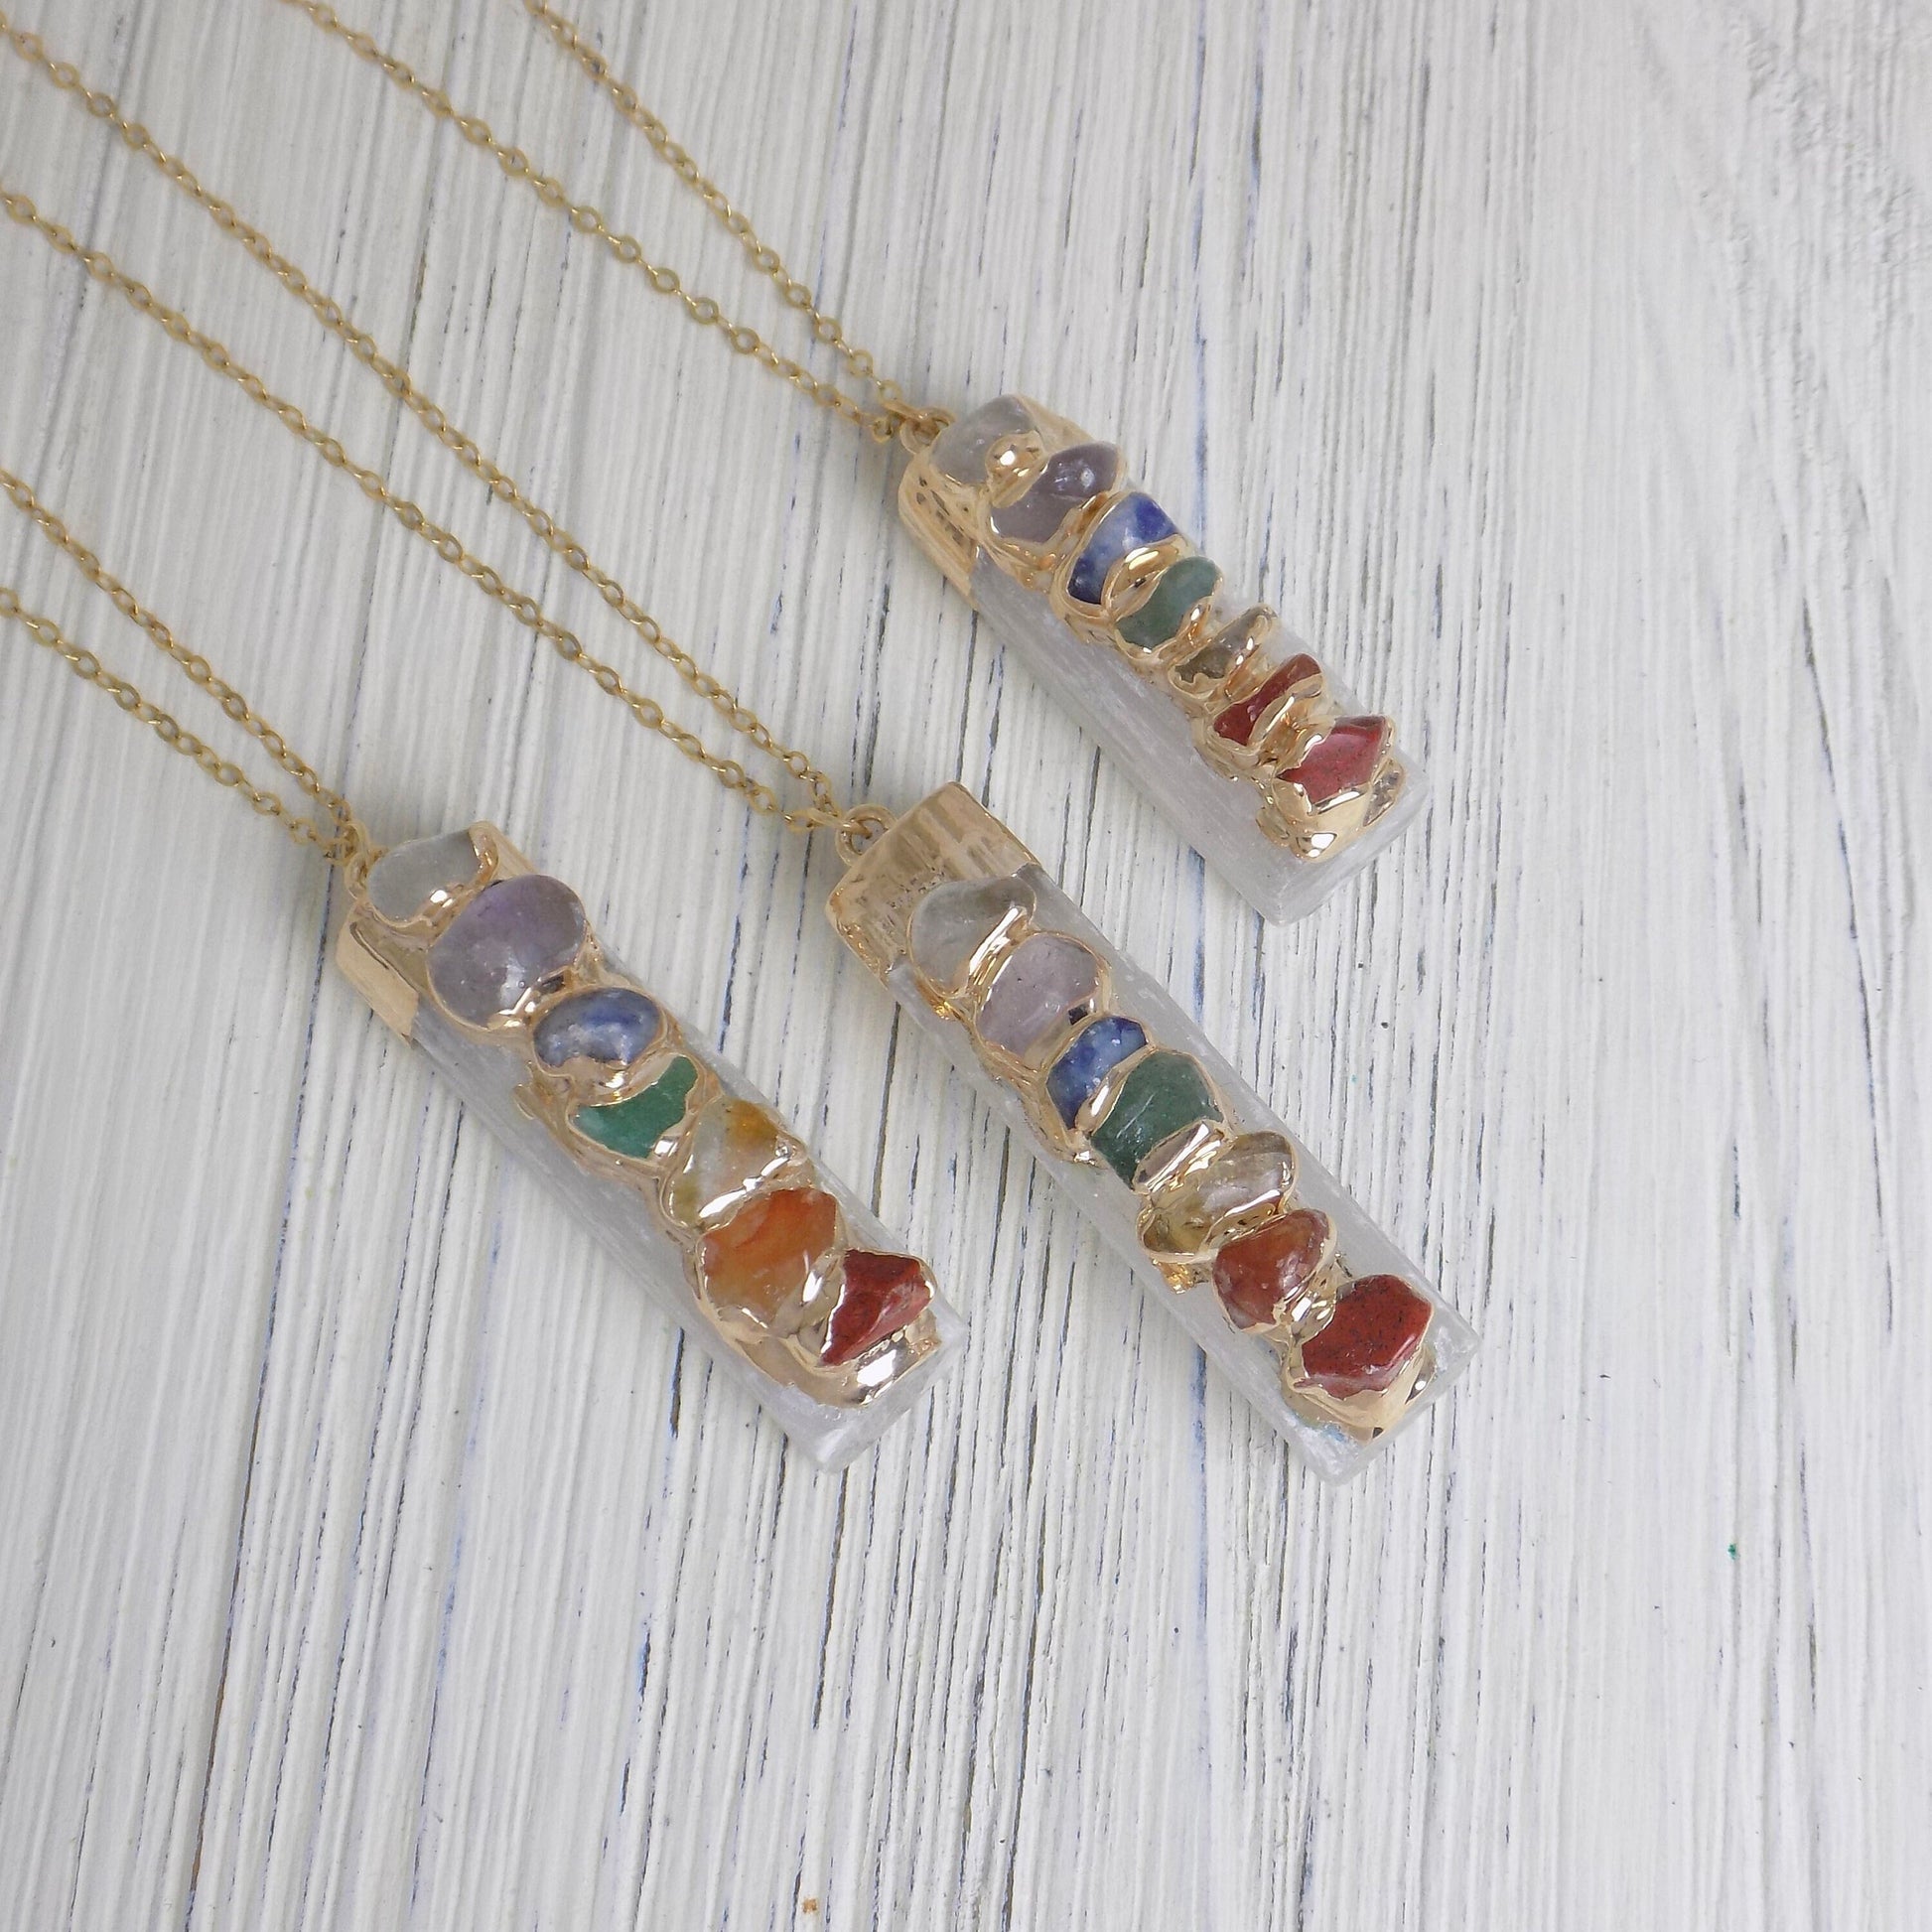 Gold Chakra Necklace, 7 Chakra Necklace, Raw Crystal Necklace